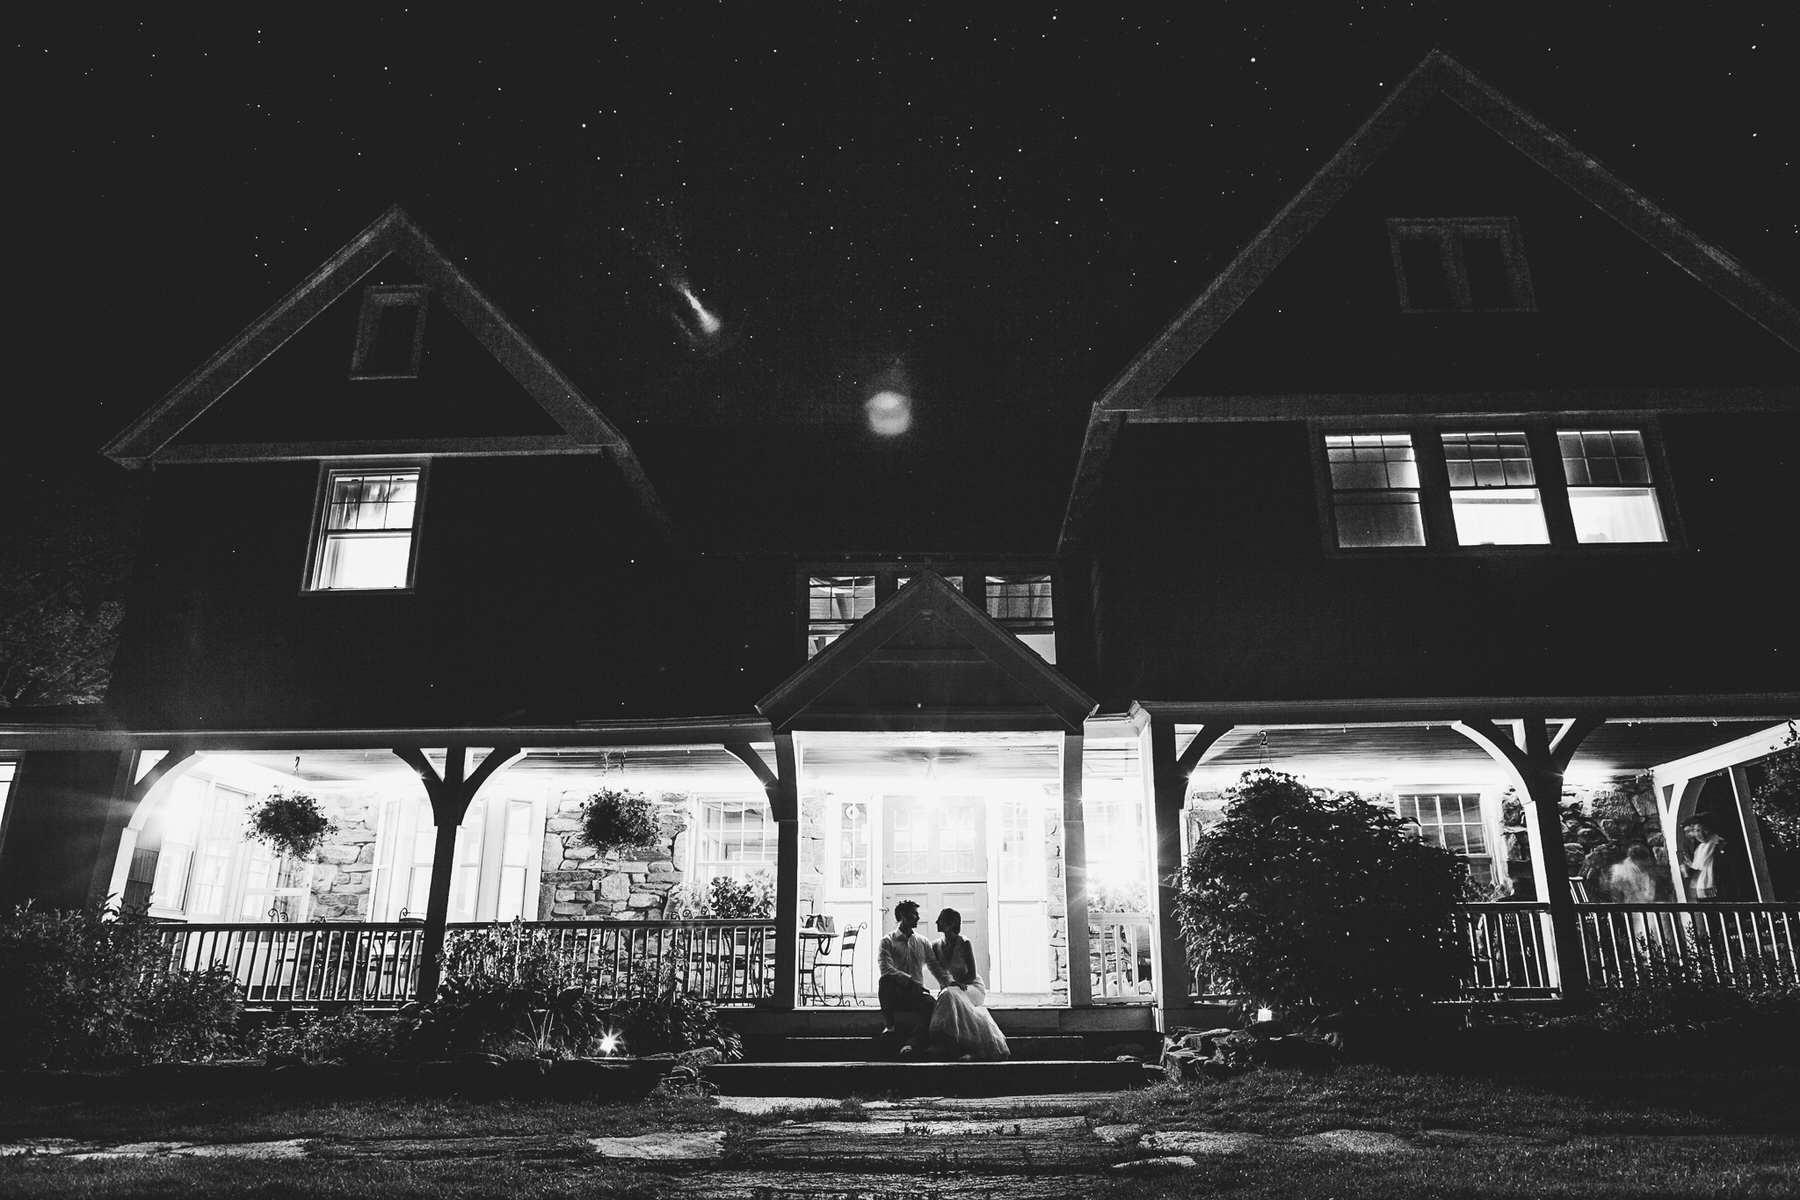 a couple standing in front of a house at night.